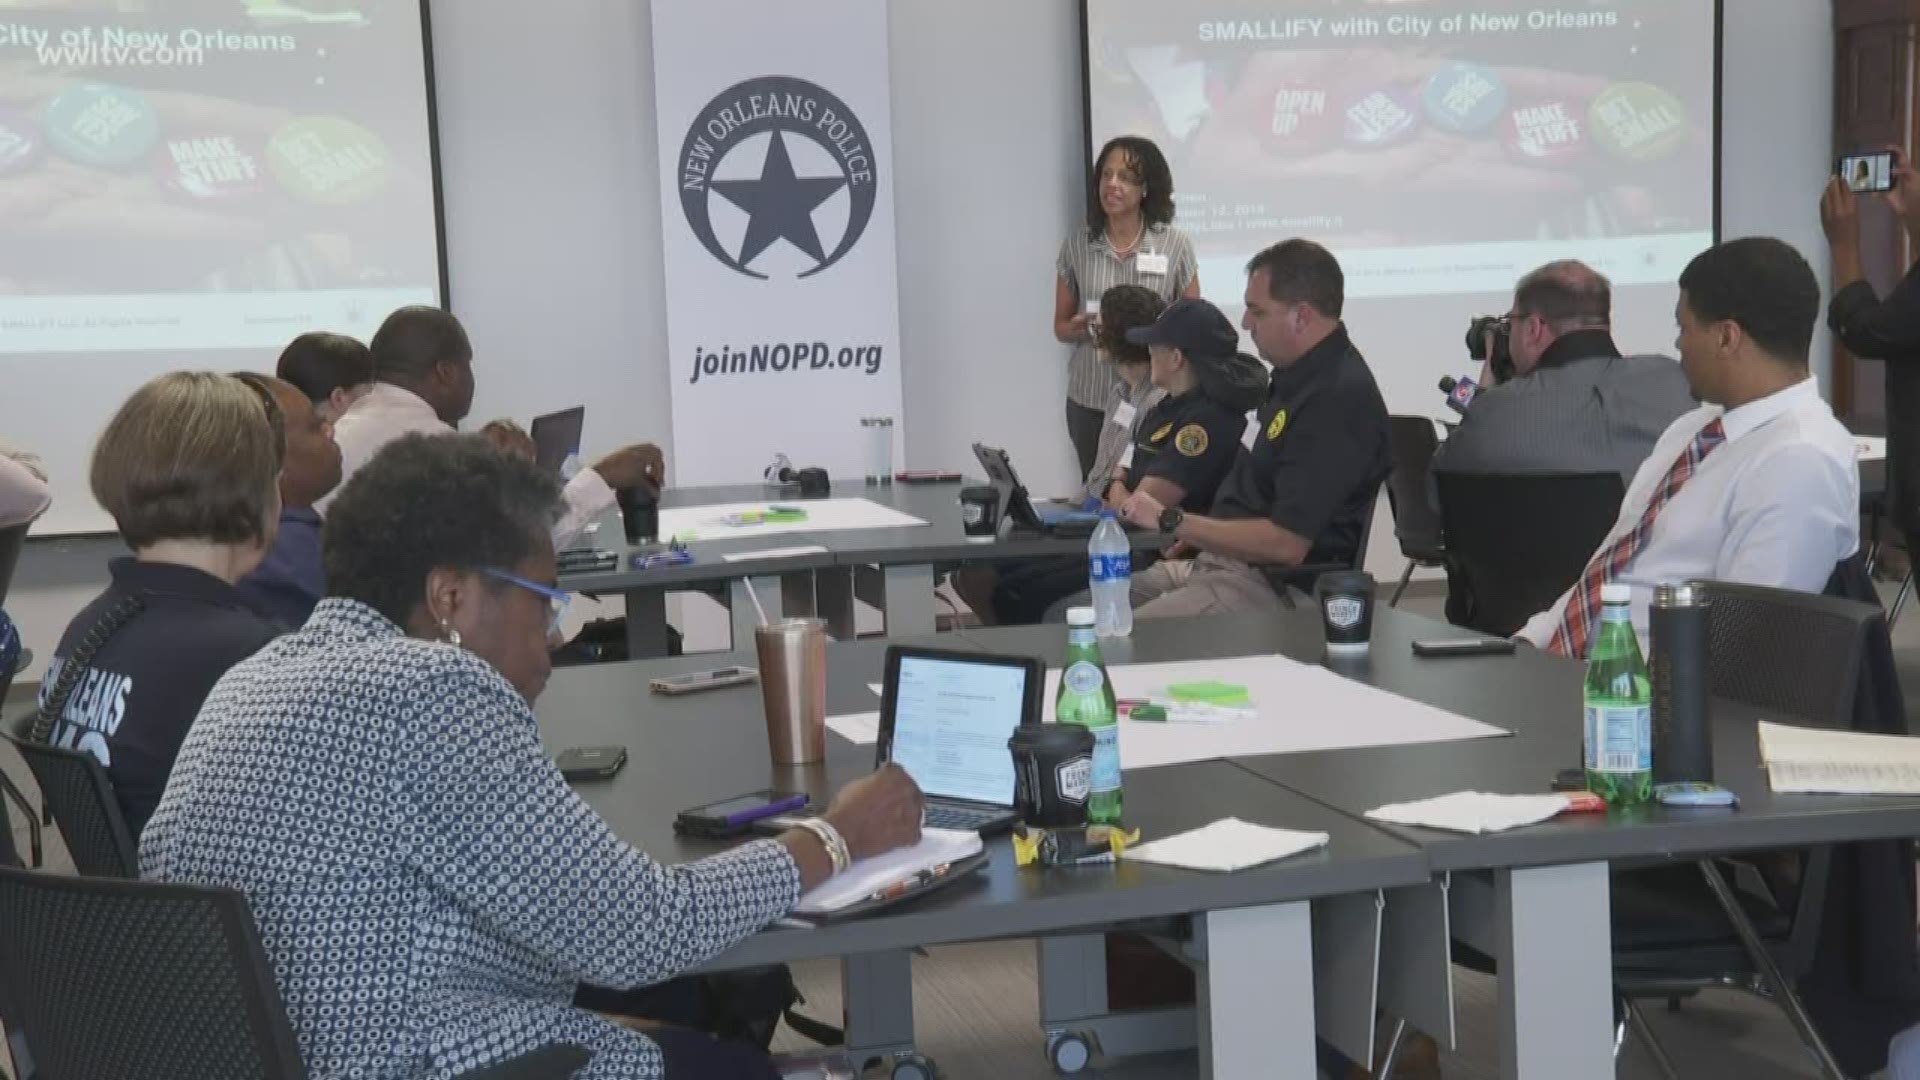 City leaders looking for ways to curb juvenile crime